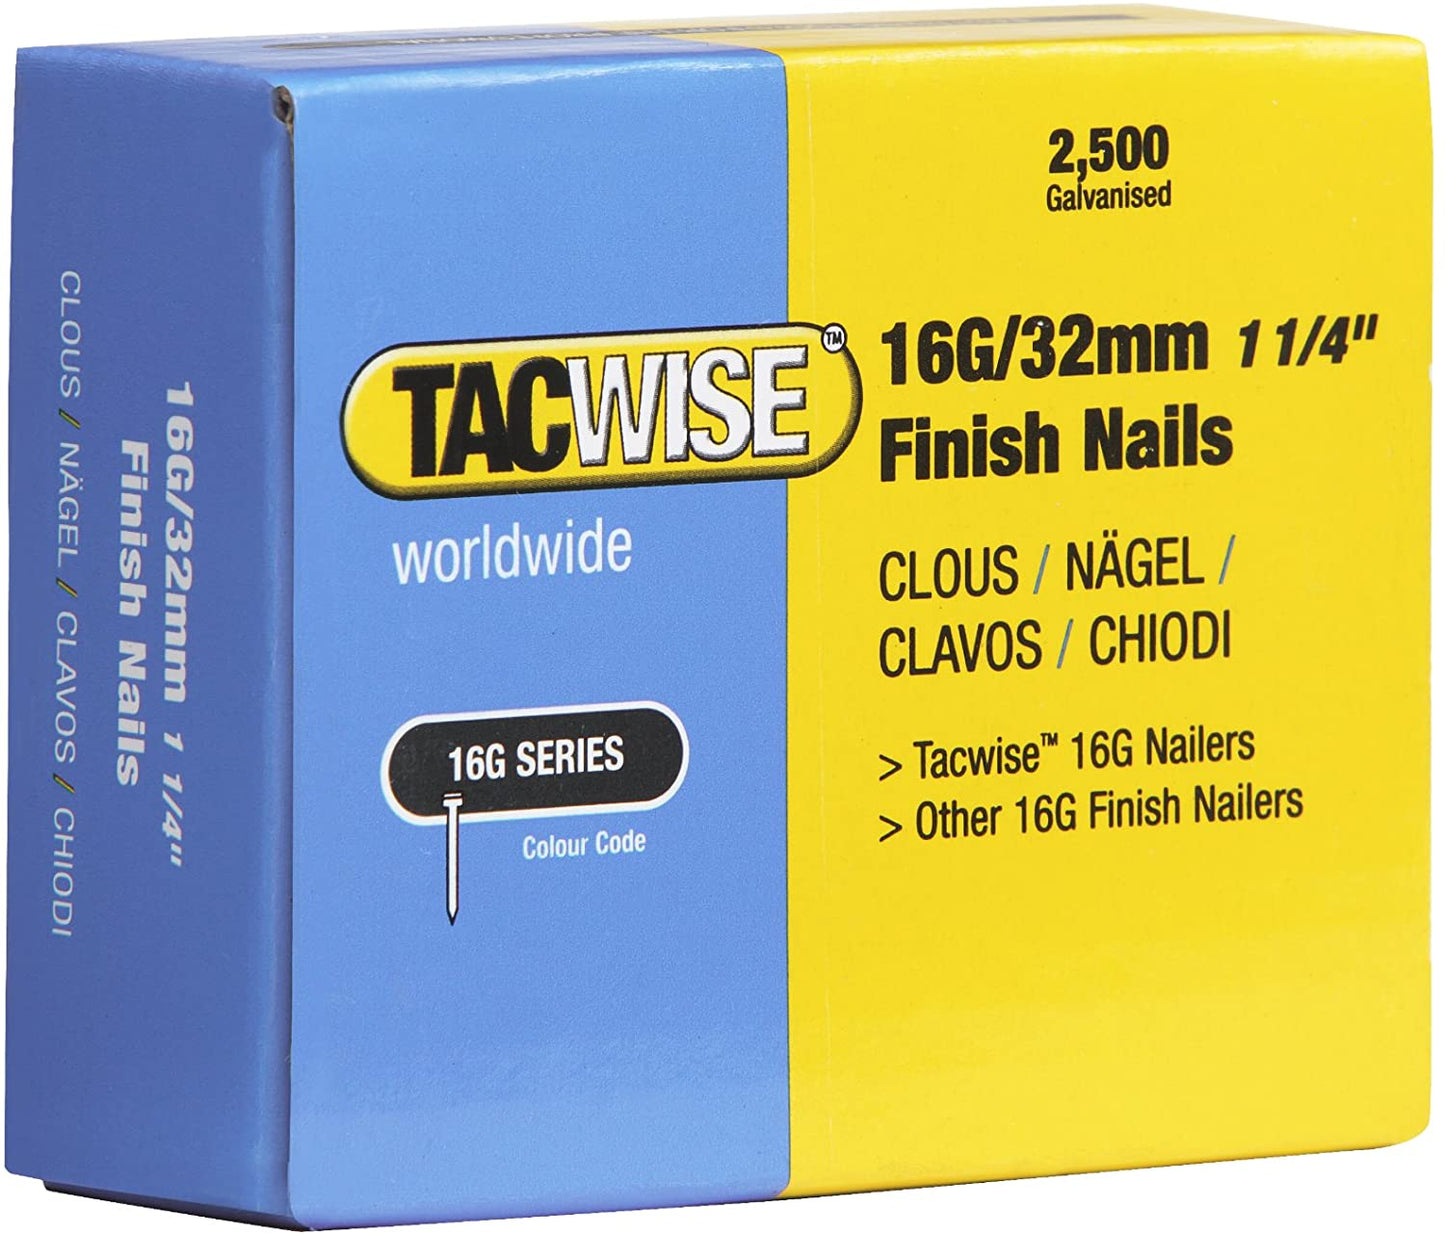 Tacwise 0294 Type 160 (16G) / 32 mm Galvanised Finish Nails, Pack of 2,500